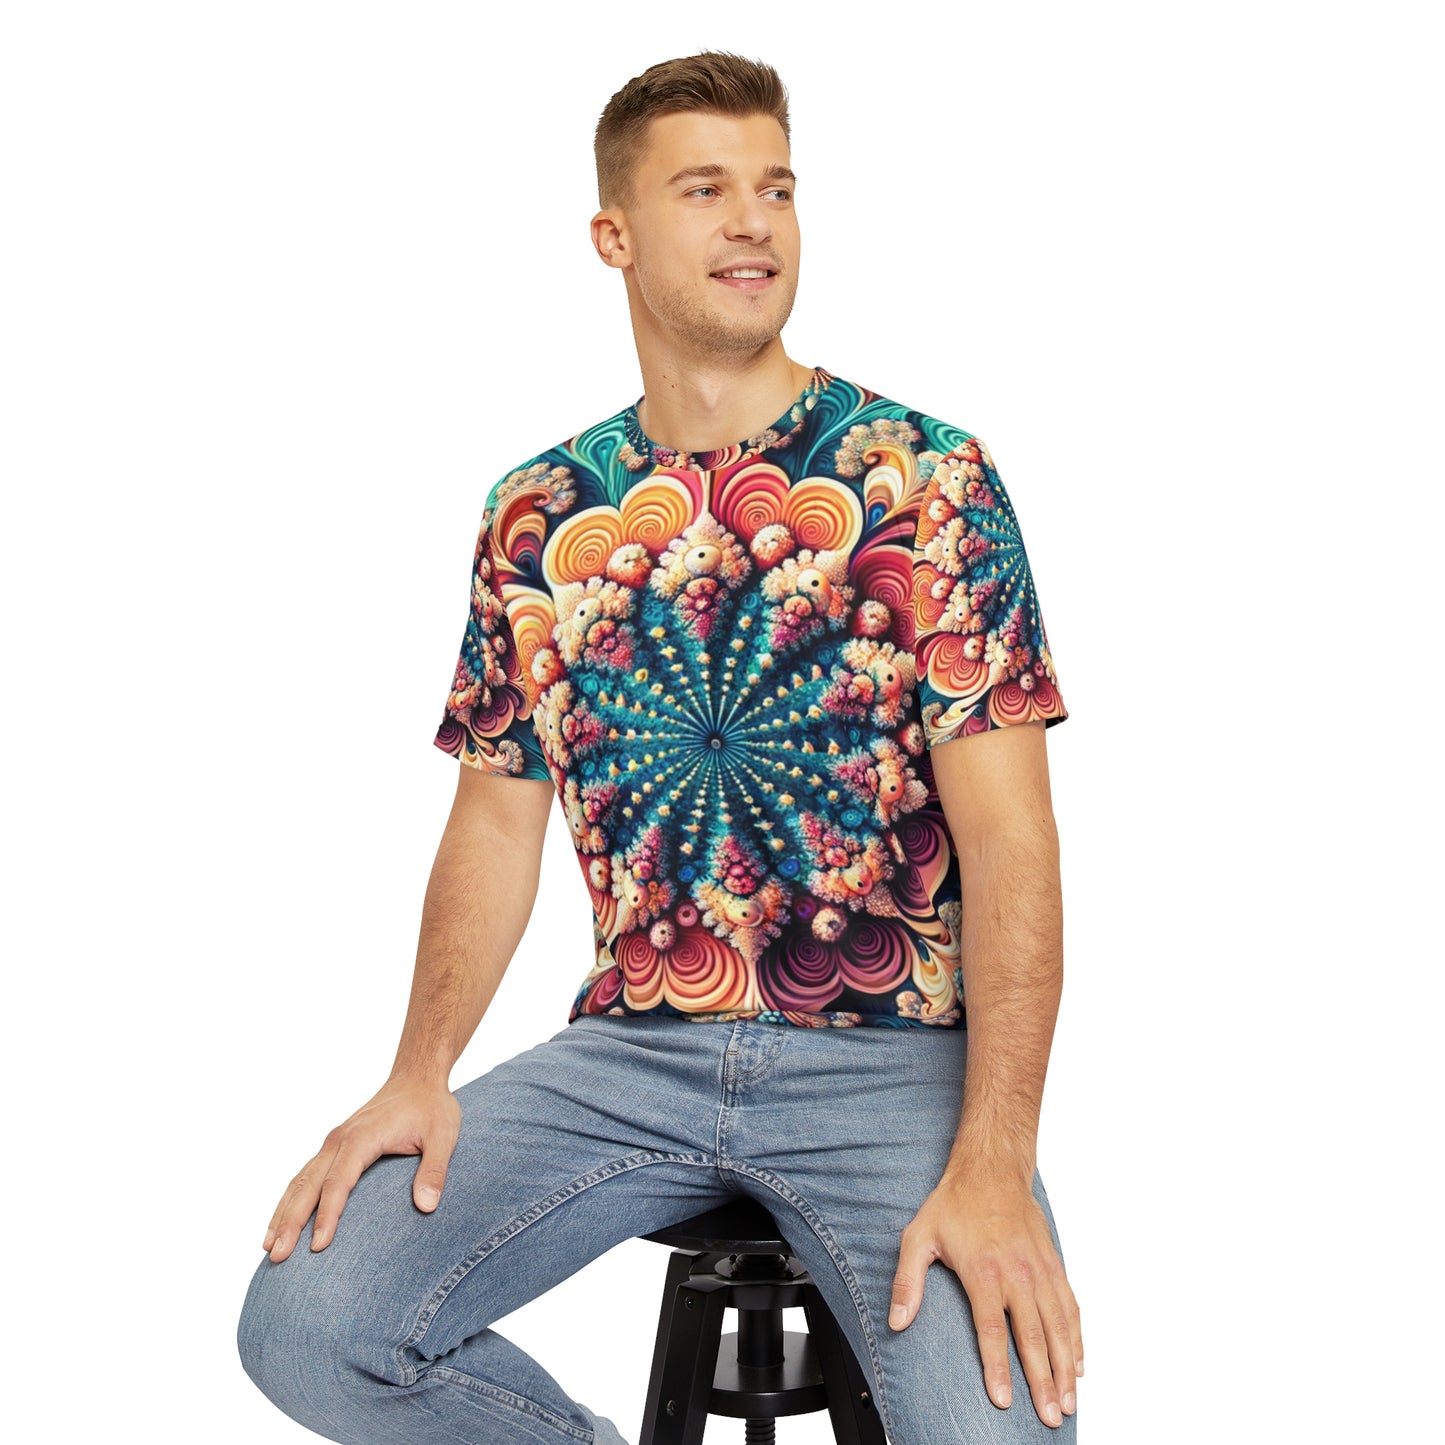 Front view of the Coral Mandala Whirl Pattern Crewneck Pullover All-Over Print Short-Sleeved Shirt black red  orange yellow blue mandala swirl pattern paired with casual denim pants worn by a white man sitting on a stool chair